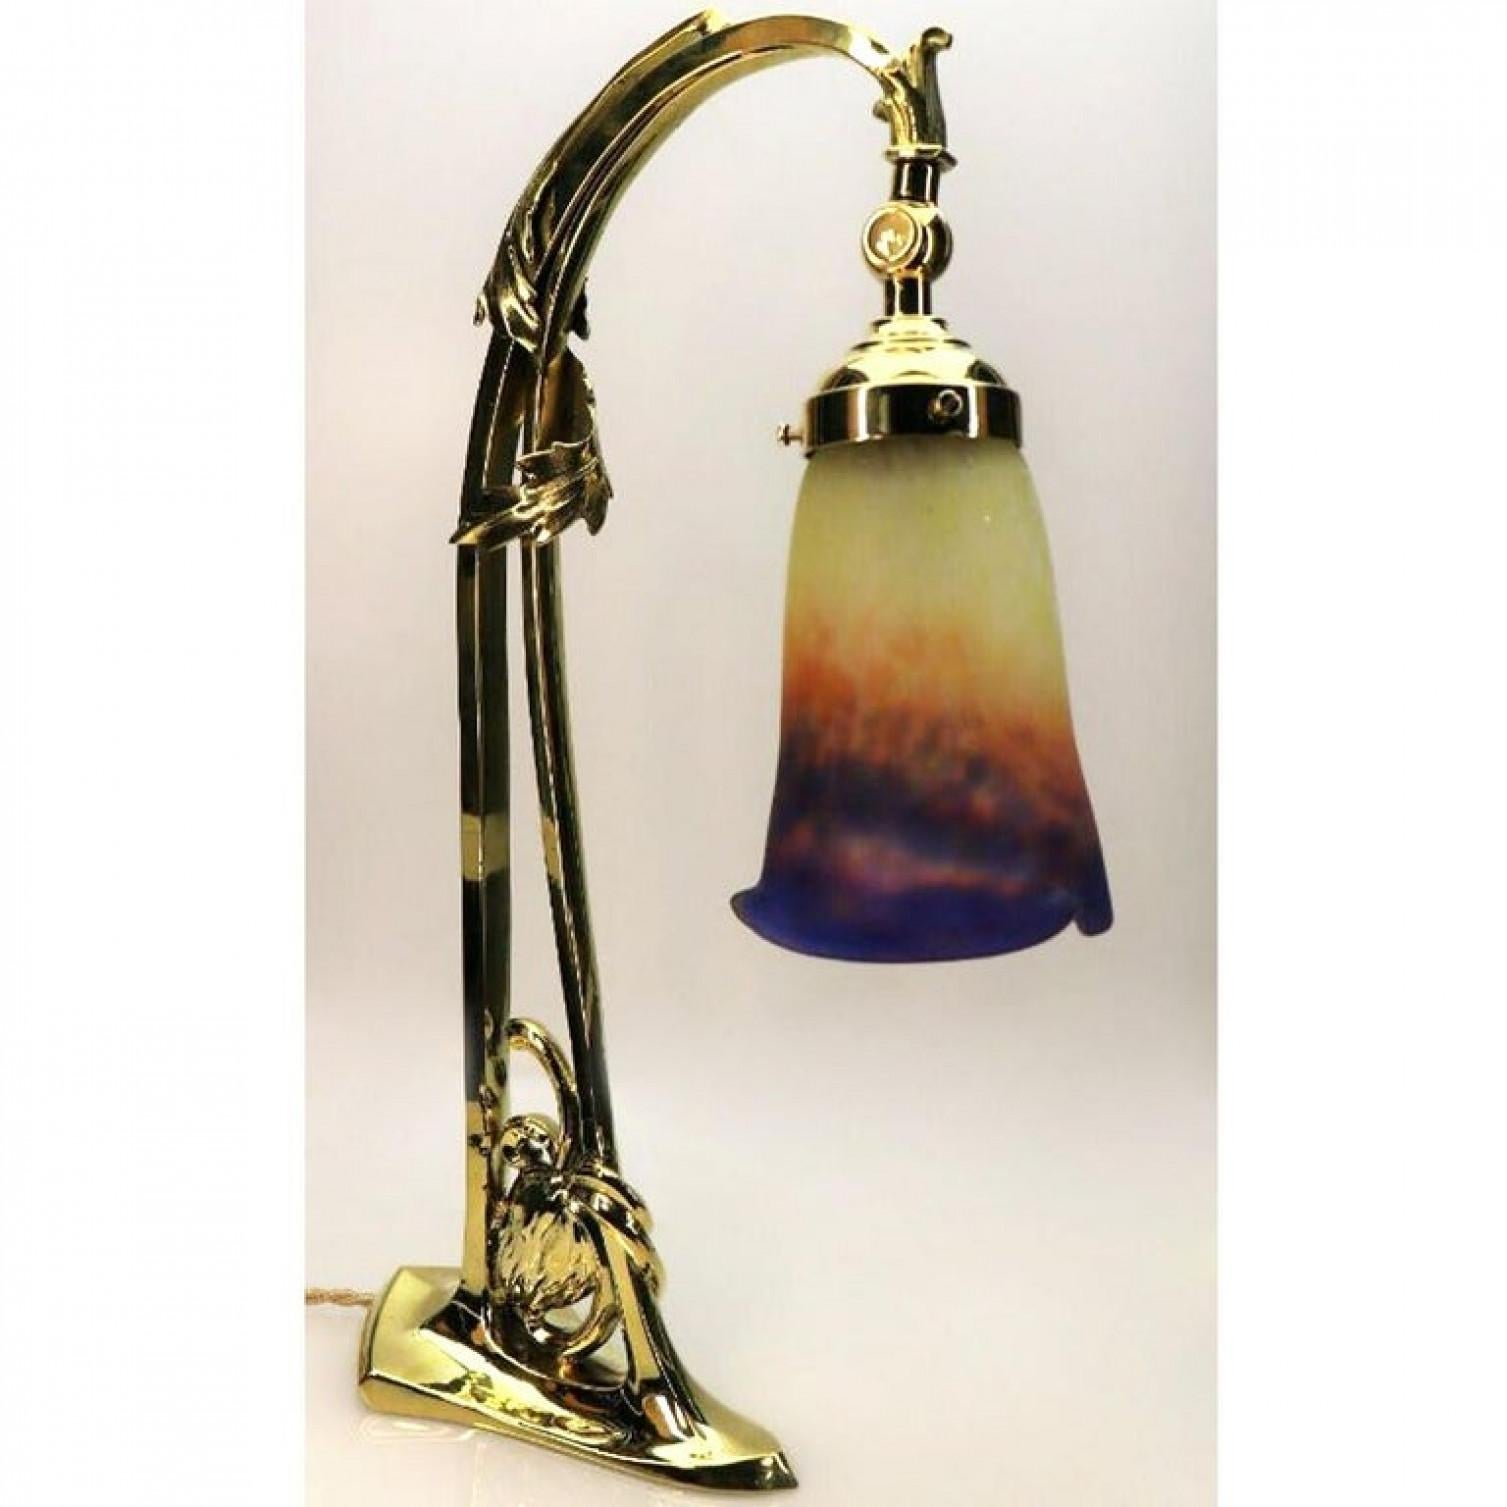 Other Art Deco Brass Pate De Verre Glass Shad Muller Fres, Table Lamp, 1910 For Sale